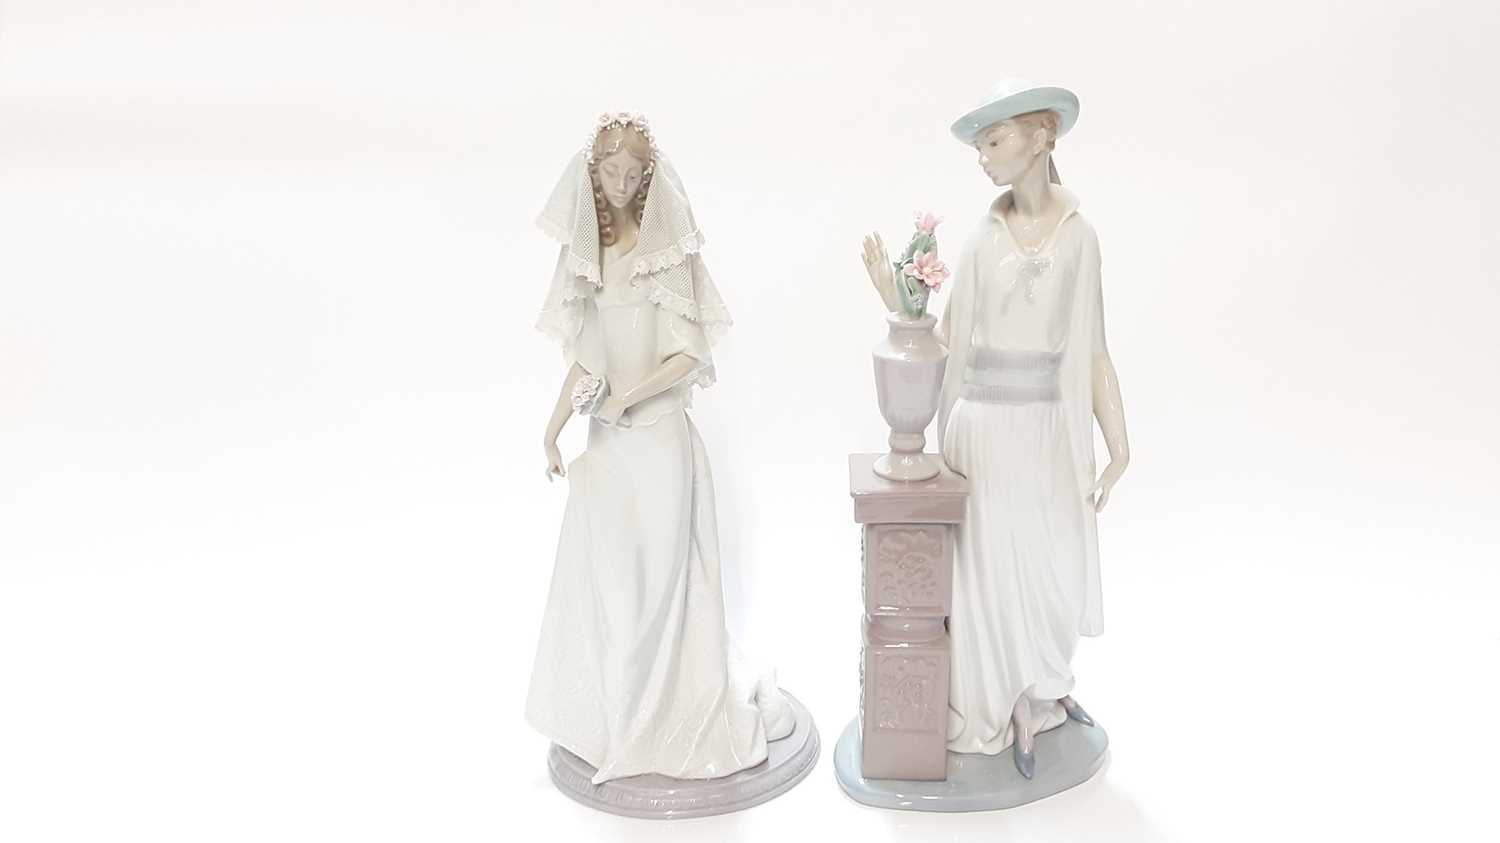 Lot 1183 - Lladro porcelain figure - Bridal Portrait, 1991-1995, numbered 5742, 33.5cm high, together with another Lladro lady, 35cm high (2)